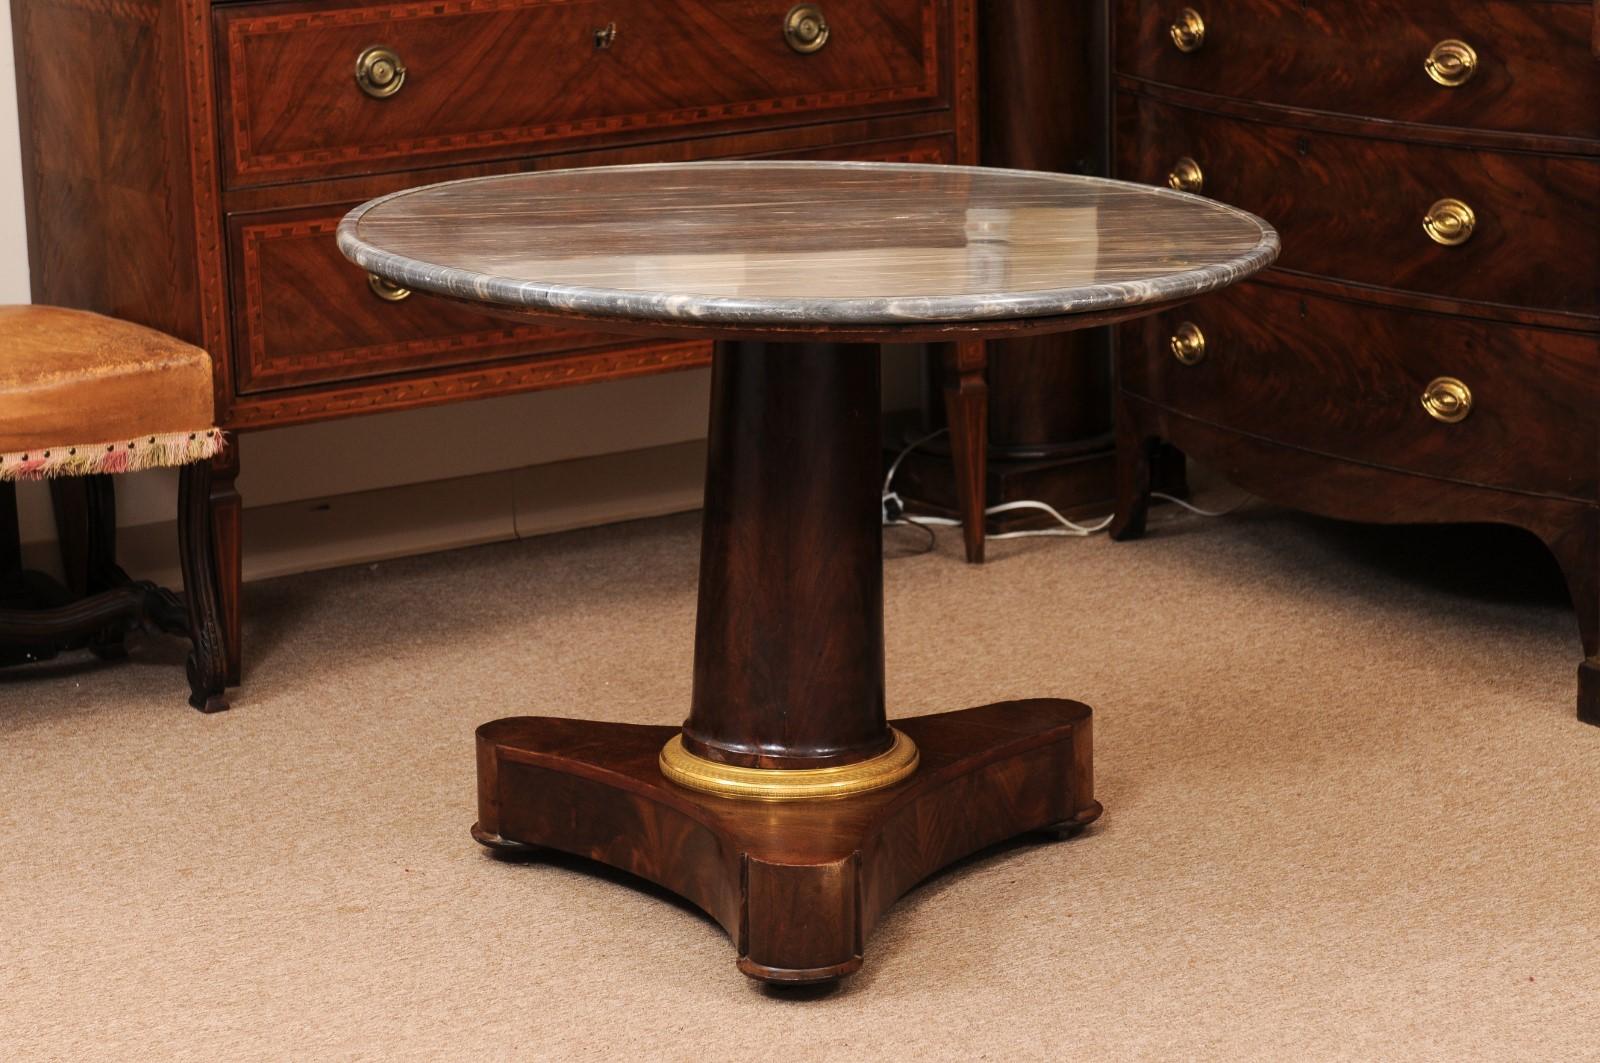  Early 19th C French Empire Walnut Center Table, Grey Marble Top & Ormolu Detail For Sale 9